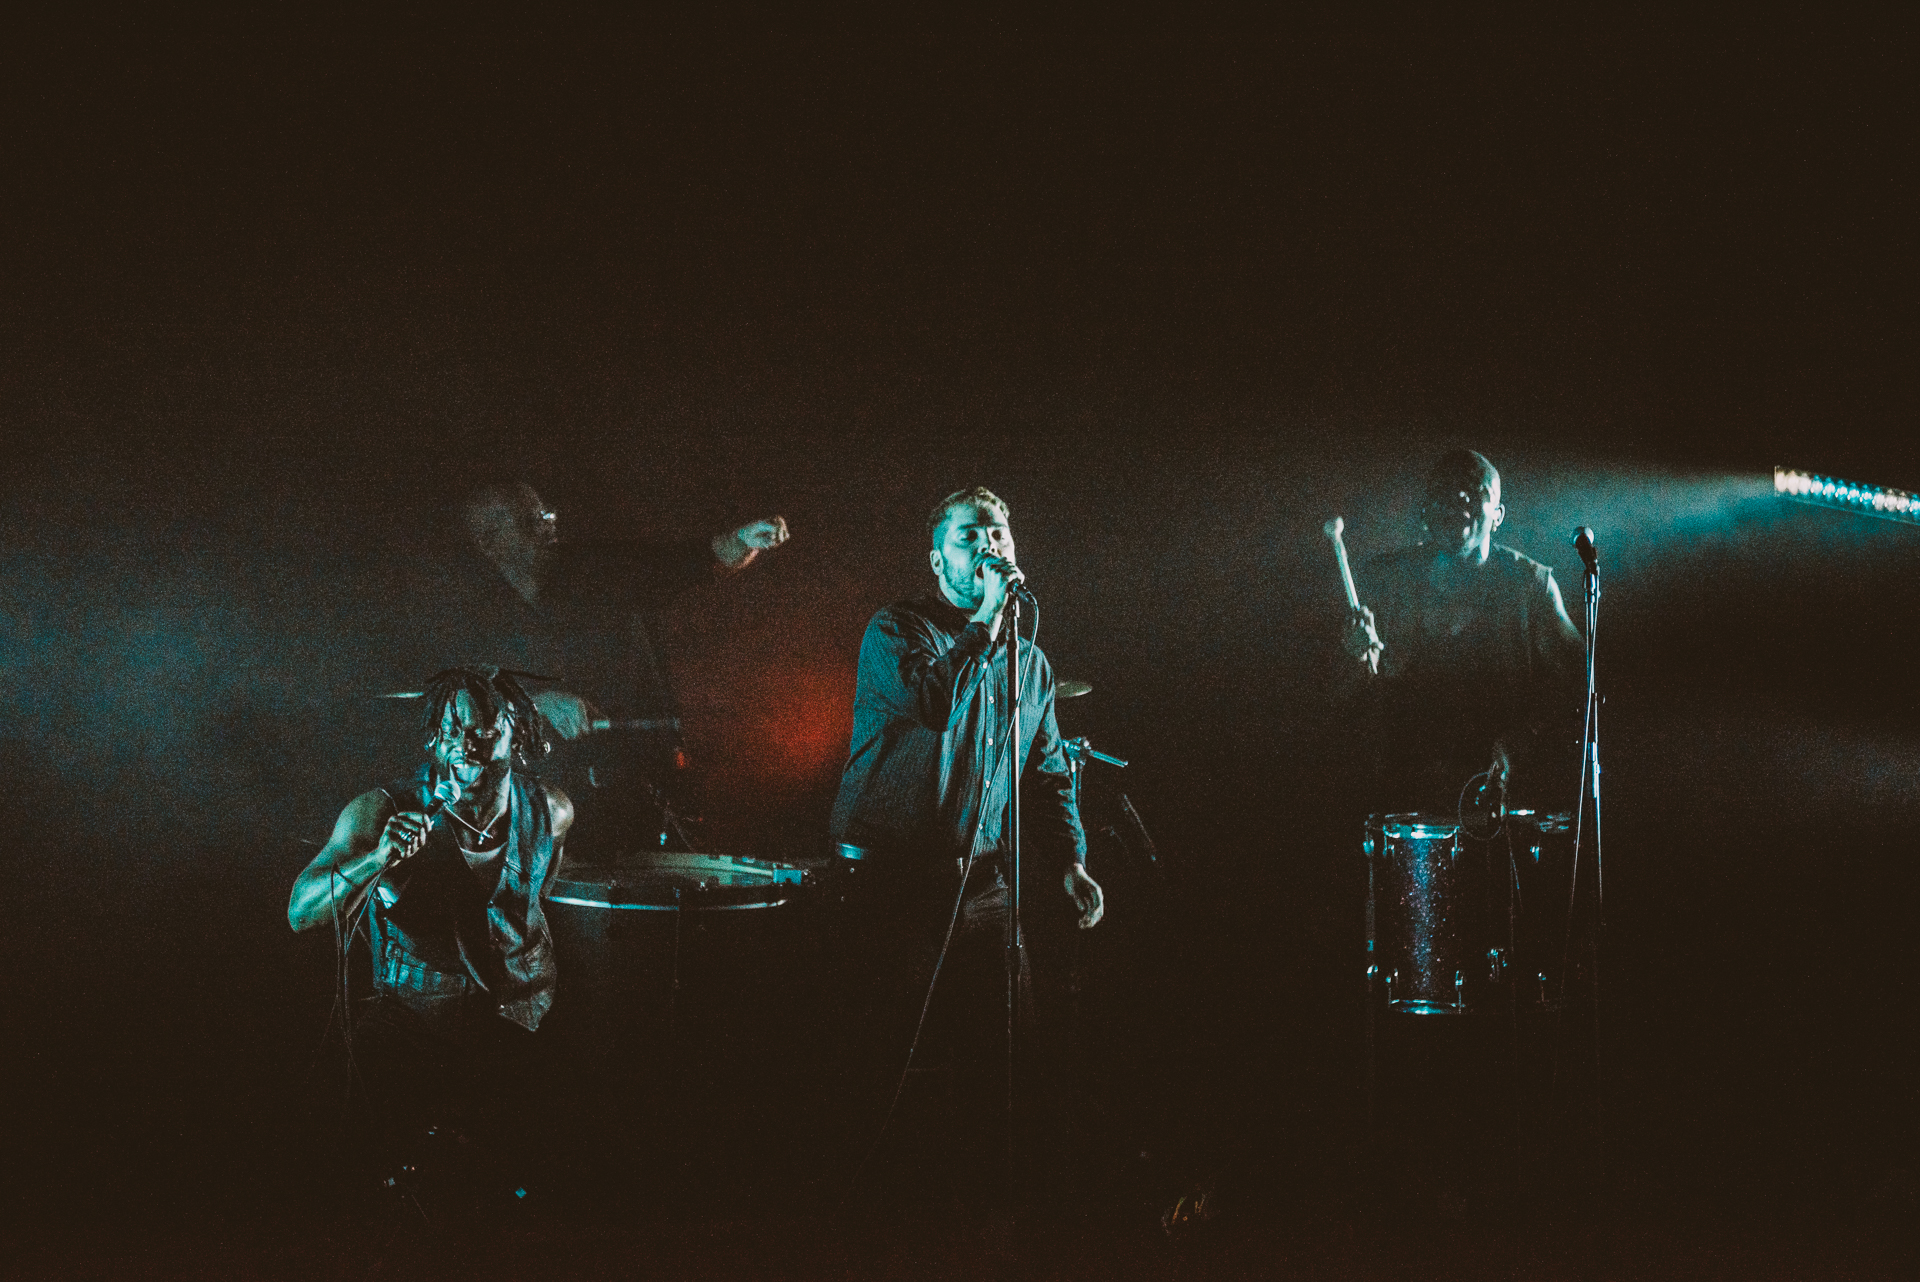 1_Young_Fathers-VENUE-Timothy_Nguyen-20181117 (19 of 23).jpg